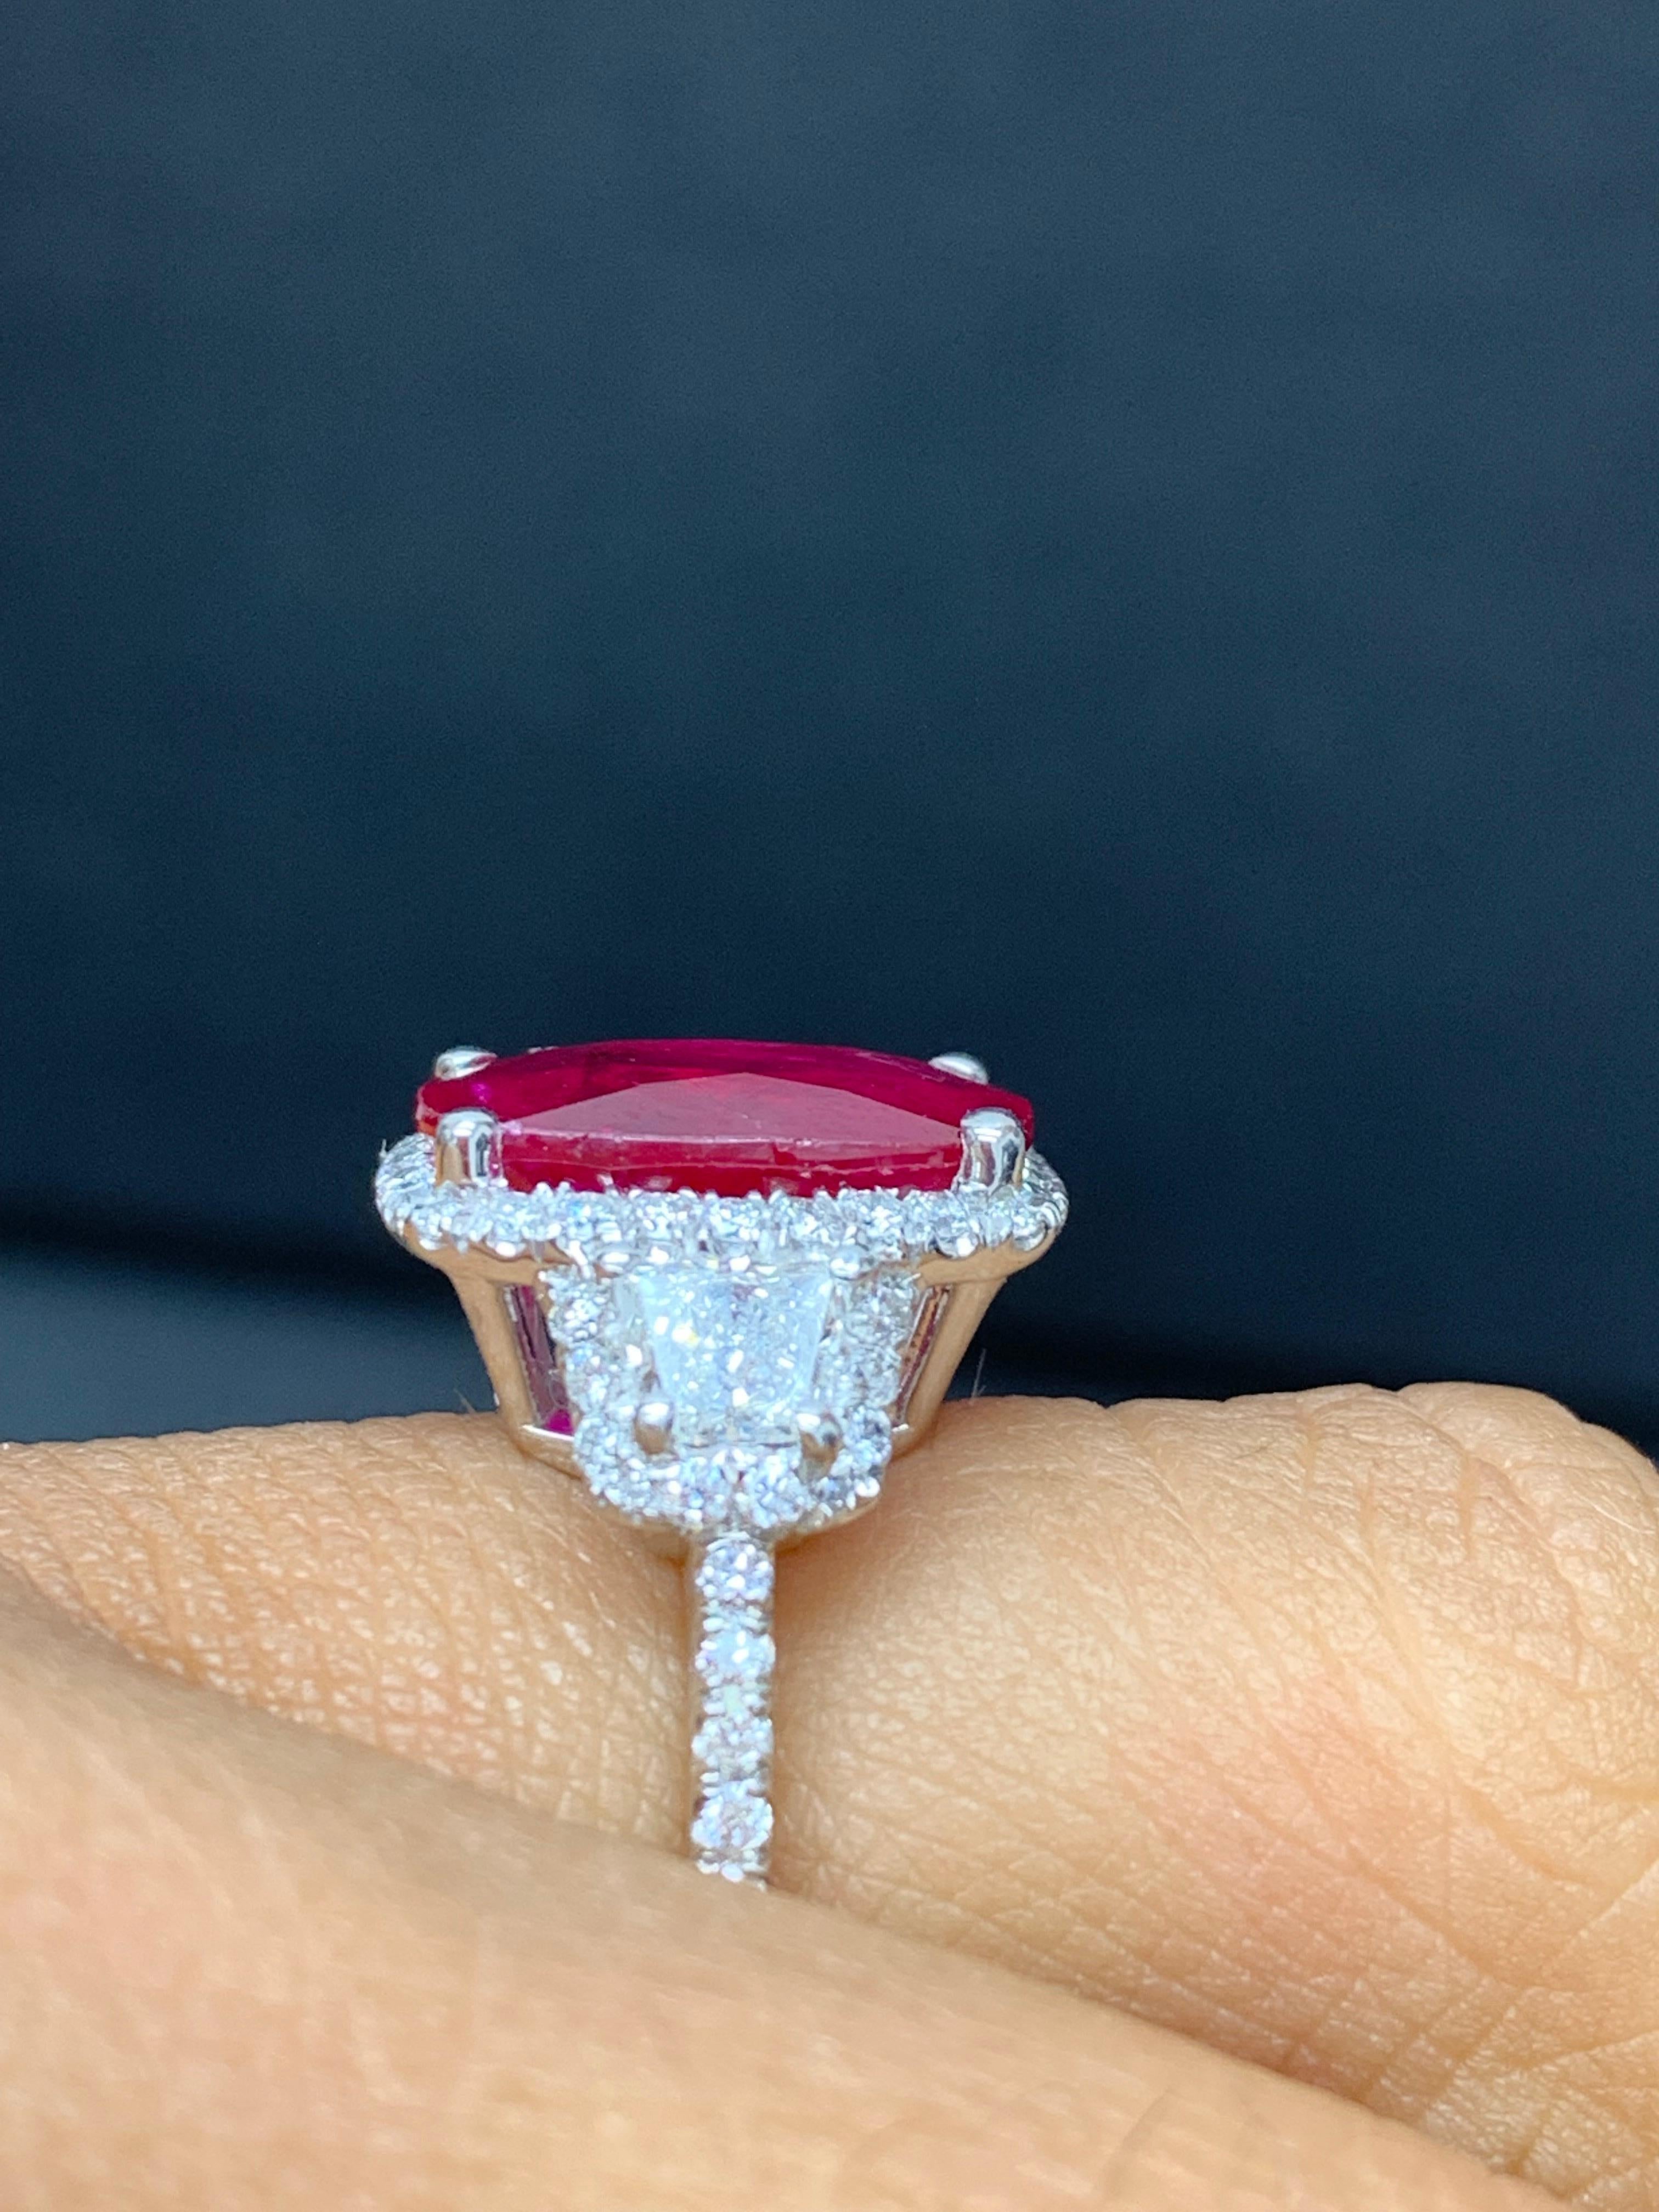 This three-stone ring is set with a 3.52-carat cushion cut ruby center stone flanked with 2 brilliant-cut trapezoid diamond side stones weighing 0.31 carats.  A single row of round brilliant diamonds accent the center and side stones. The total